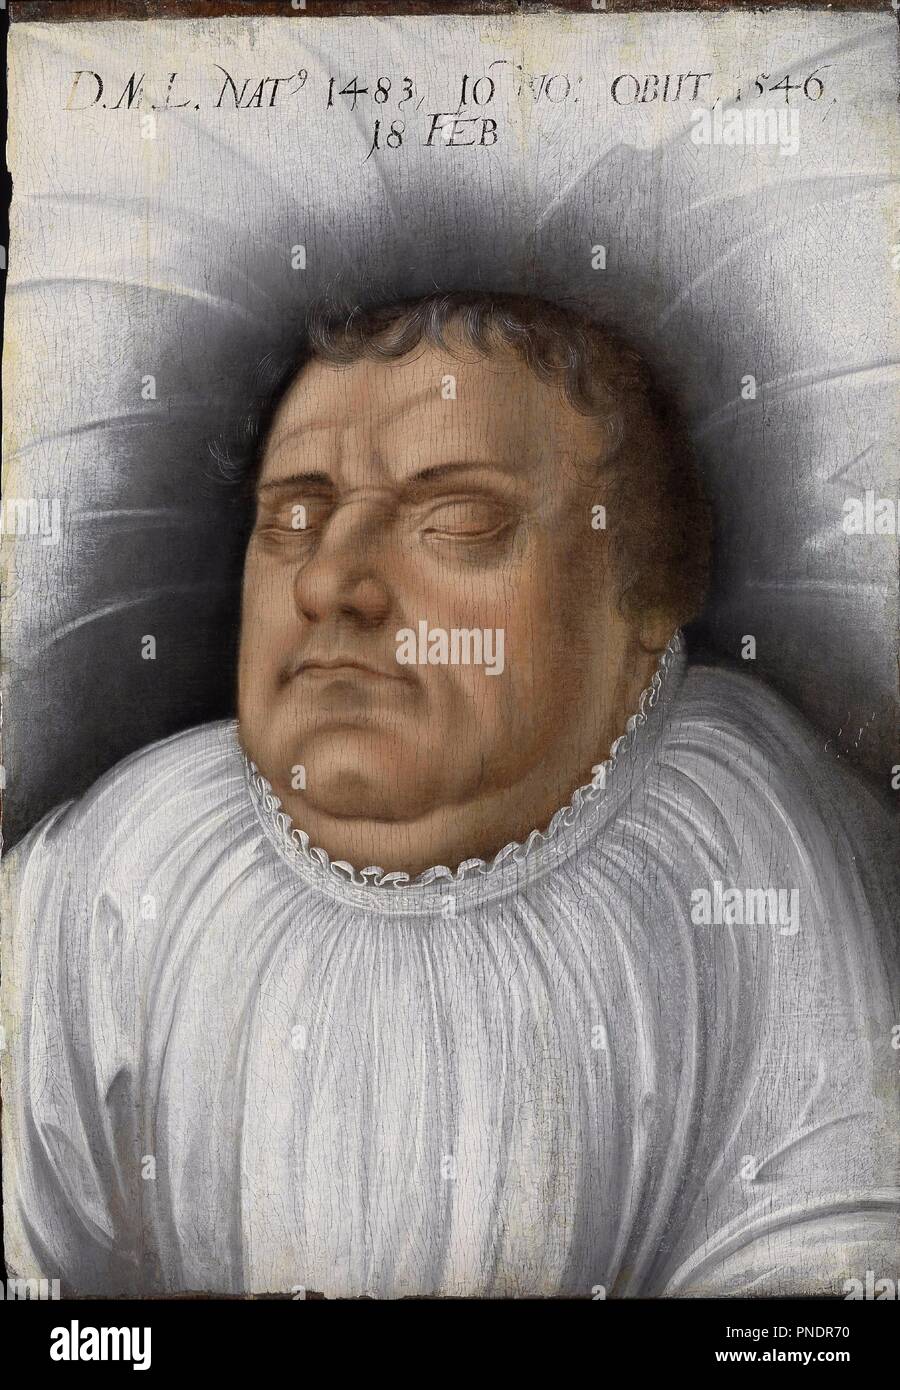 Luther auf dem Totenbett / Portrait of Martin Luther on his Death-bed. Date/Period: Ca. 1600. Mixed media on panel. Height: 47 cm (18.5 in); Width: 32.5 cm (12.7 in). Author: Cranach the Elder, Lucas. Stock Photo